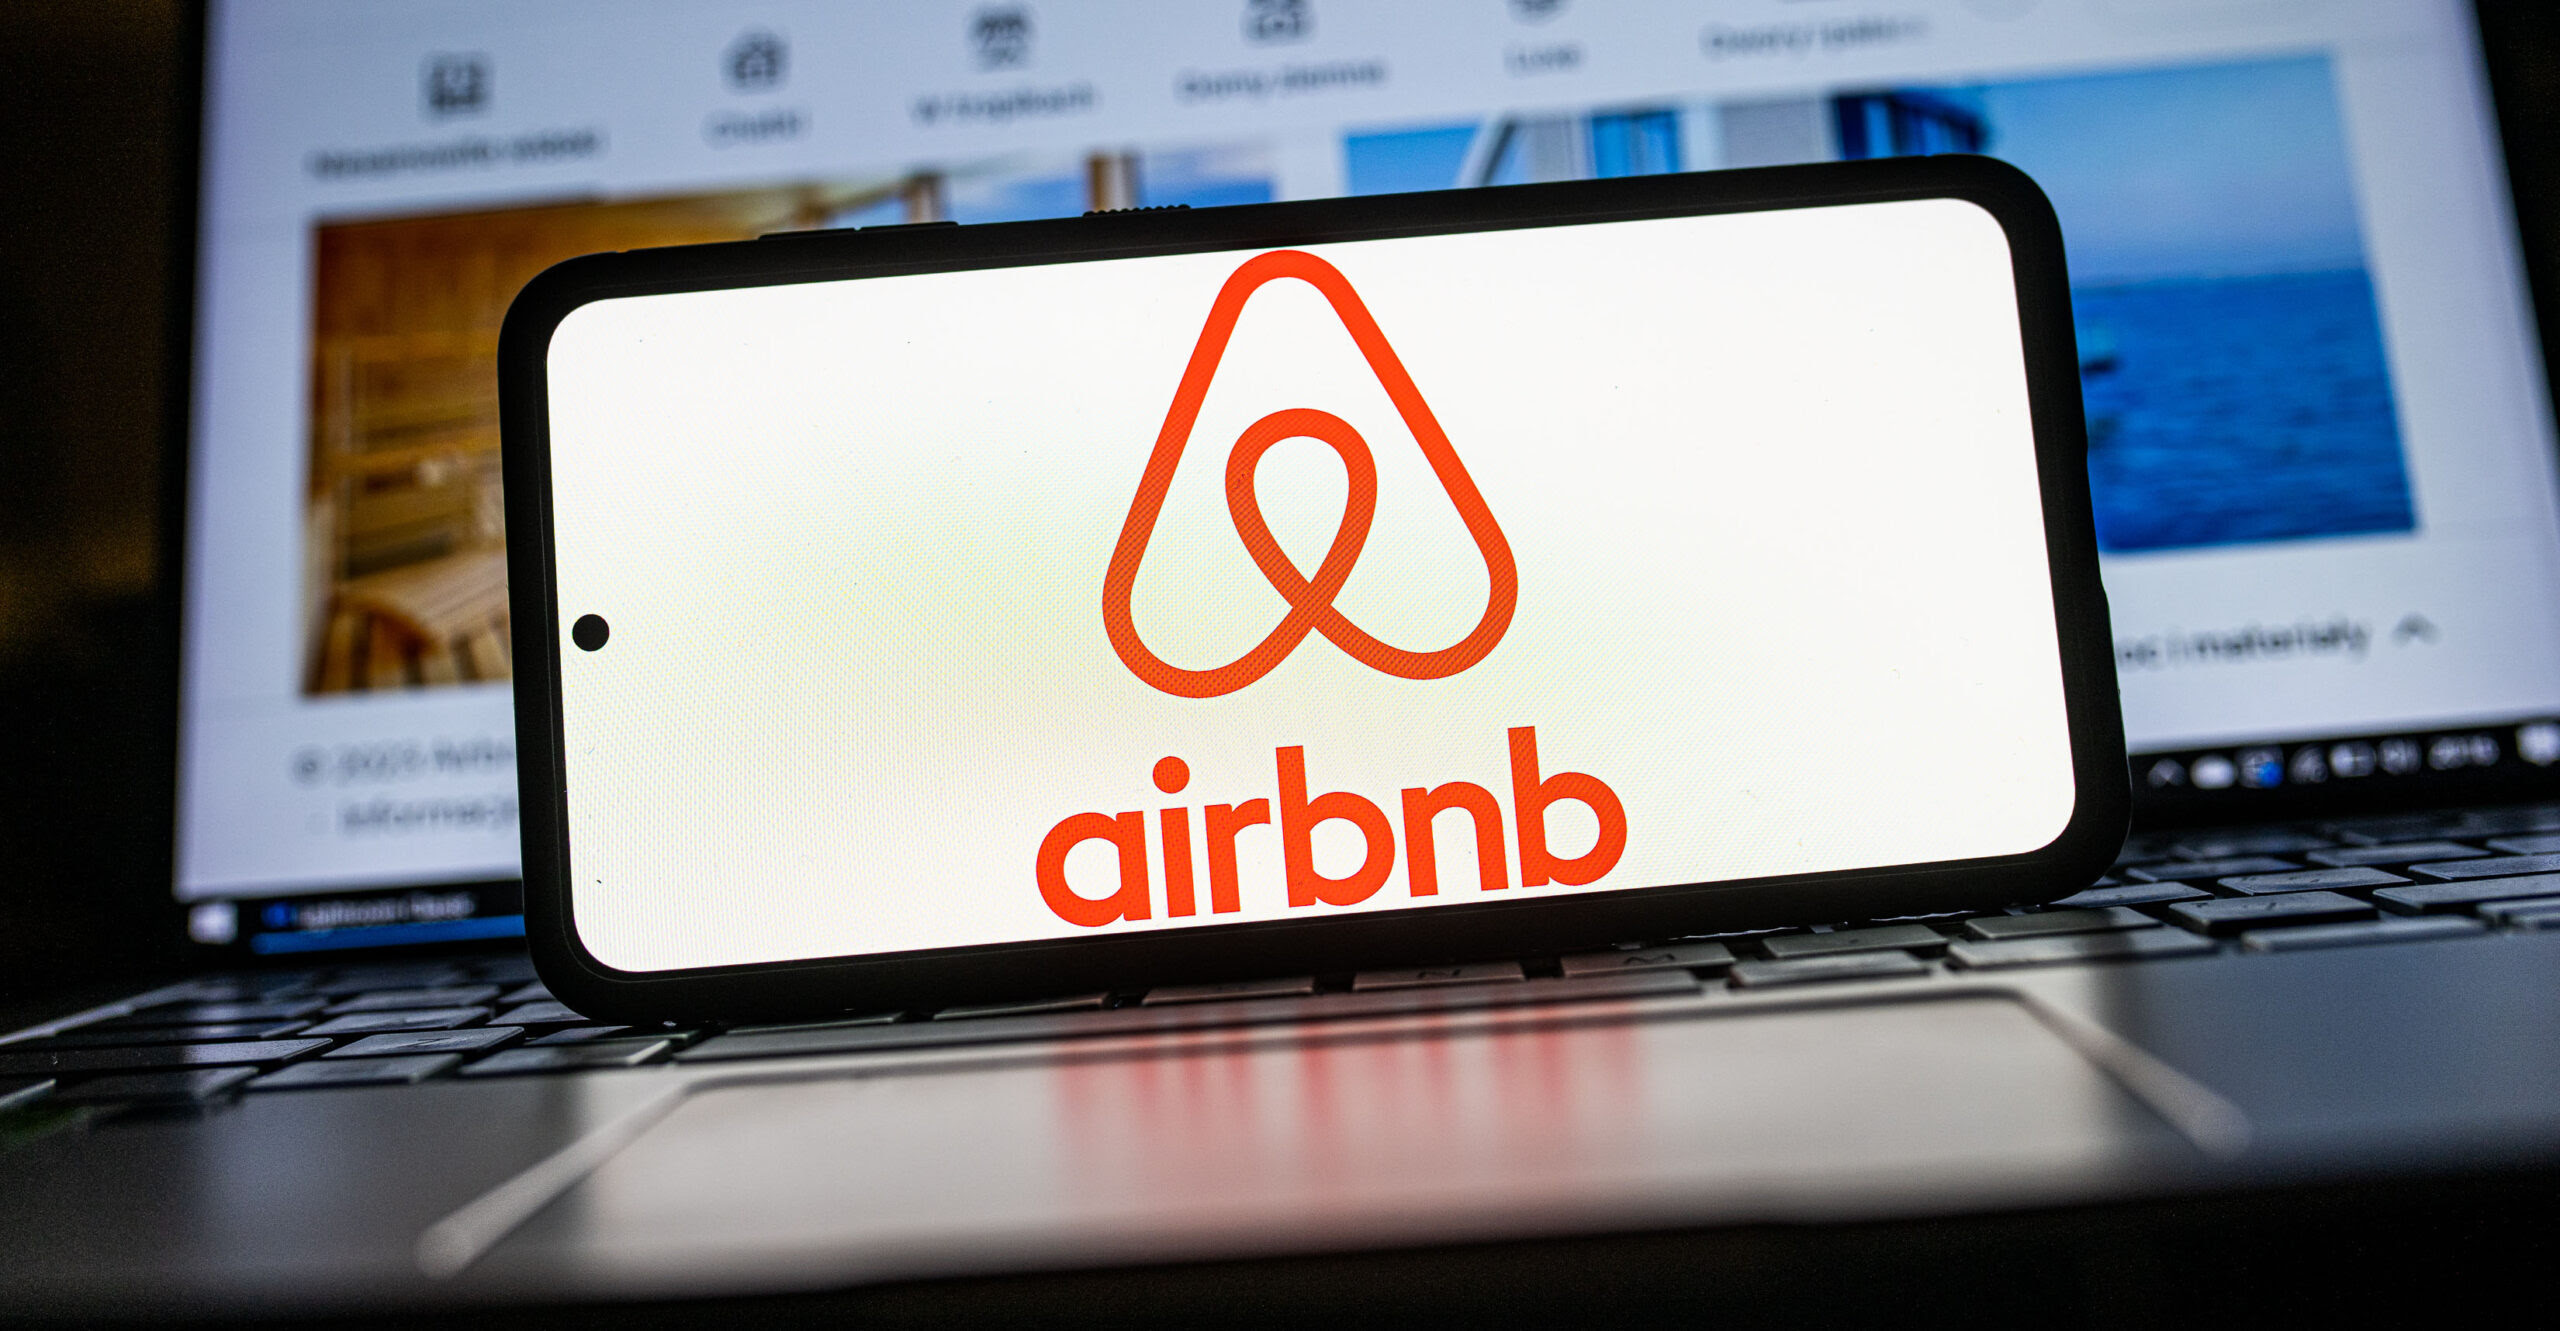 Could Airbnb’s Ban on This Conservative Filmmaker’s Parents Be a Preview of Chinese-Style Social Credit System?